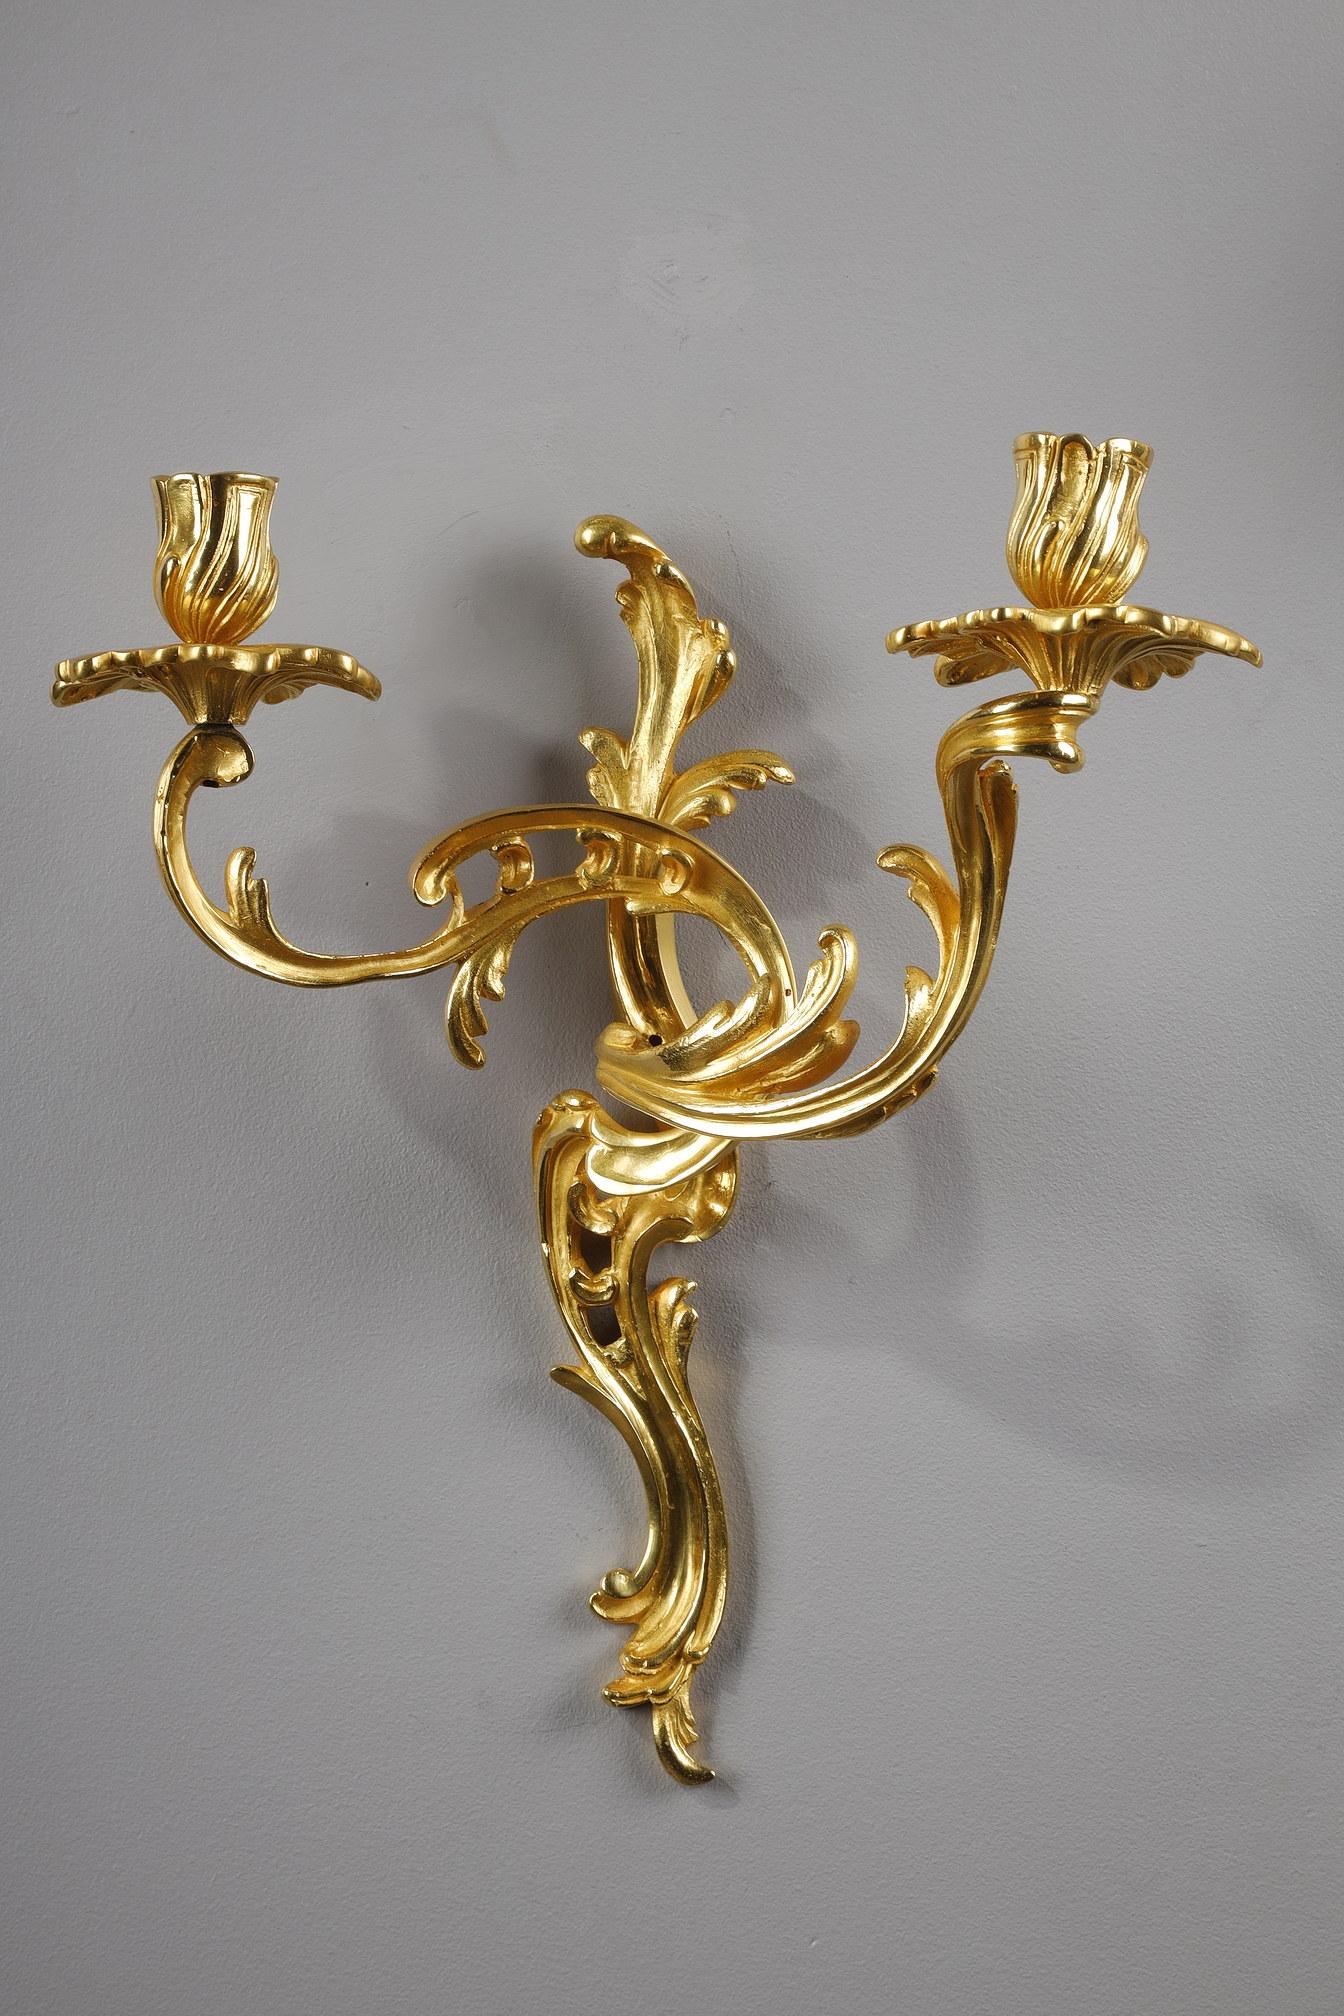 Pair of ormolu candlesticks with two arms of light in Louis XV style. With their decorations of moving foliage, these candleholders are typical of the Rocaille style. The binnacles are treated like flower buds with leaves. 

This reinterpretation